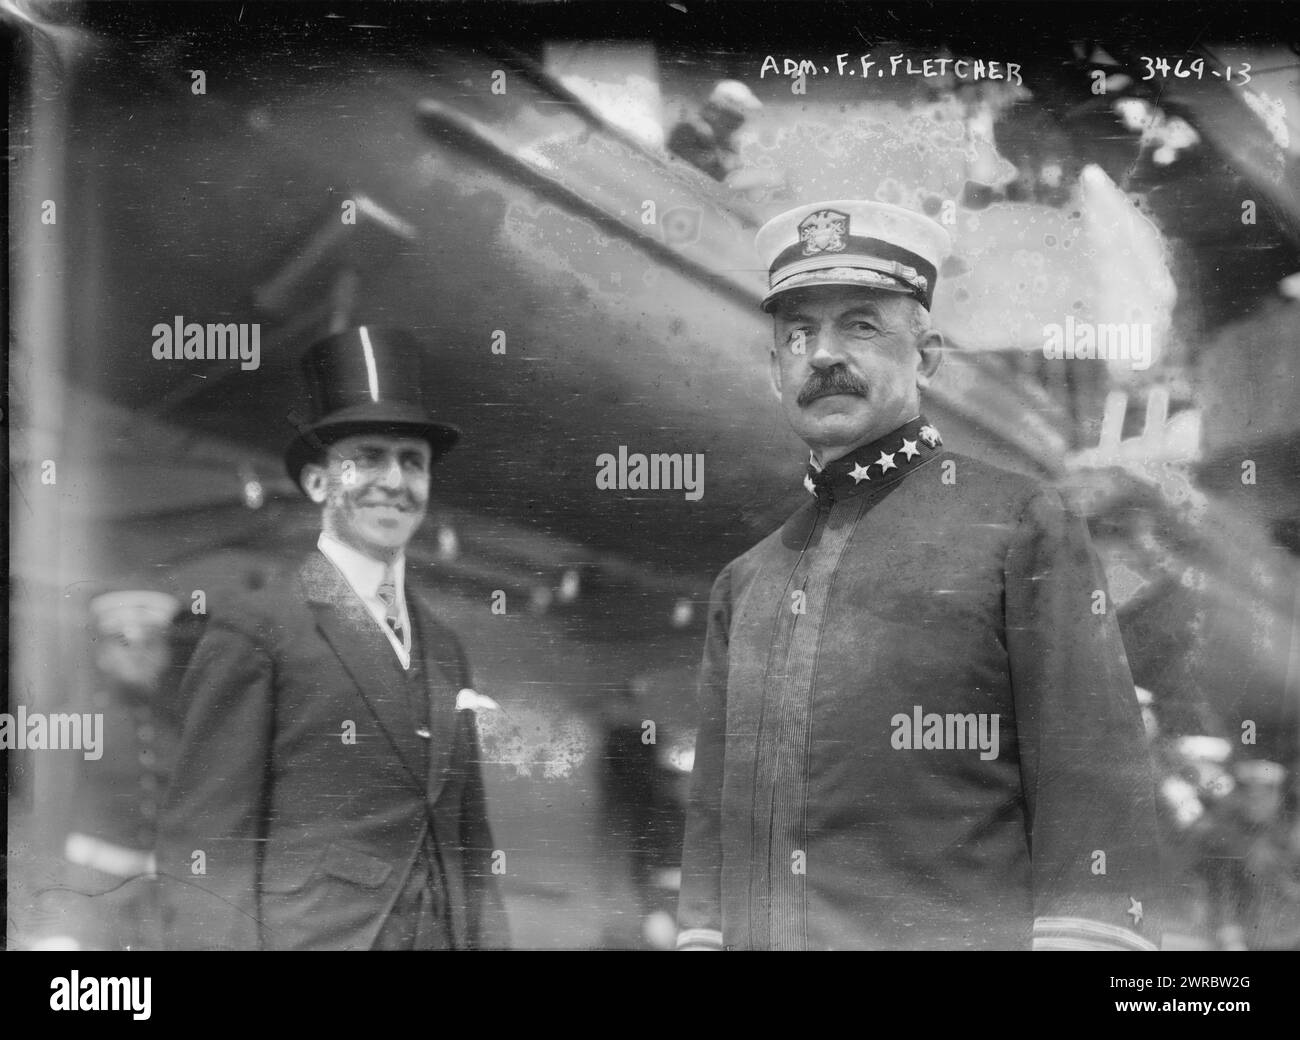 Adm. F.F. Fletcher, Photograph shows U.S. Navy Admiral Frank Friday Fletcher (1855-1928), Commander of the Atlantic fleet probably on the USS Wyoming for the Naval review of May, 1915, in New York City., 1915, Glass negatives, 1 negative: glass Stock Photo